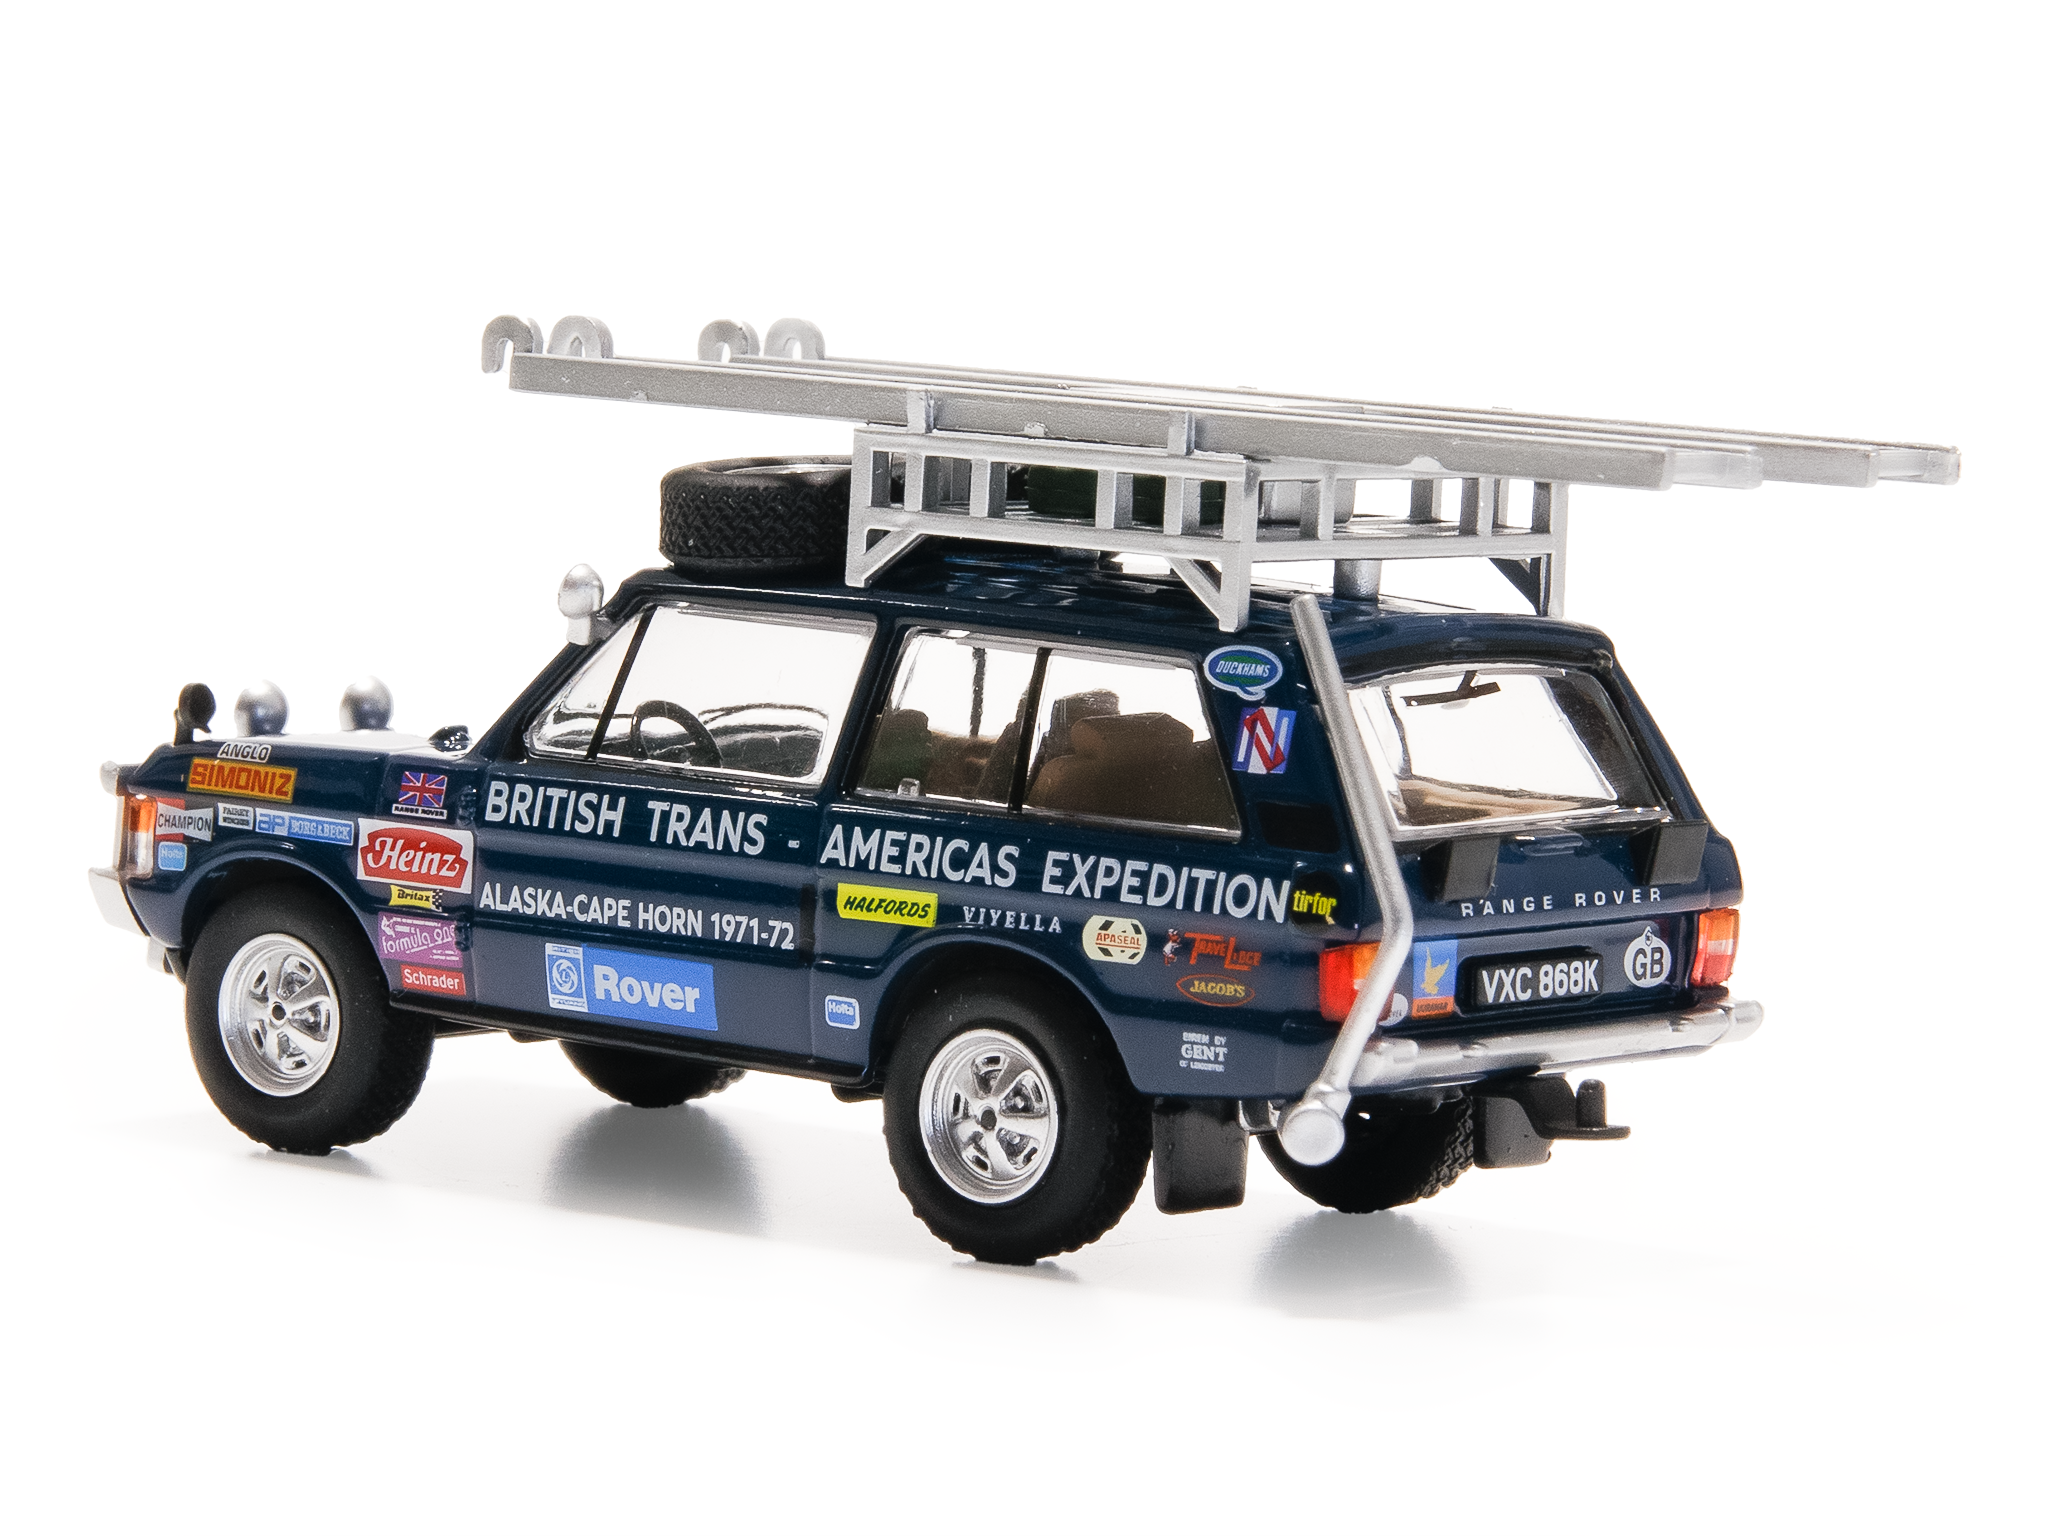 Land Rover Range Rover (VXC-868K) British Trans-Americas Expedition 1971 - 1:64 Scale Diecast Model Car